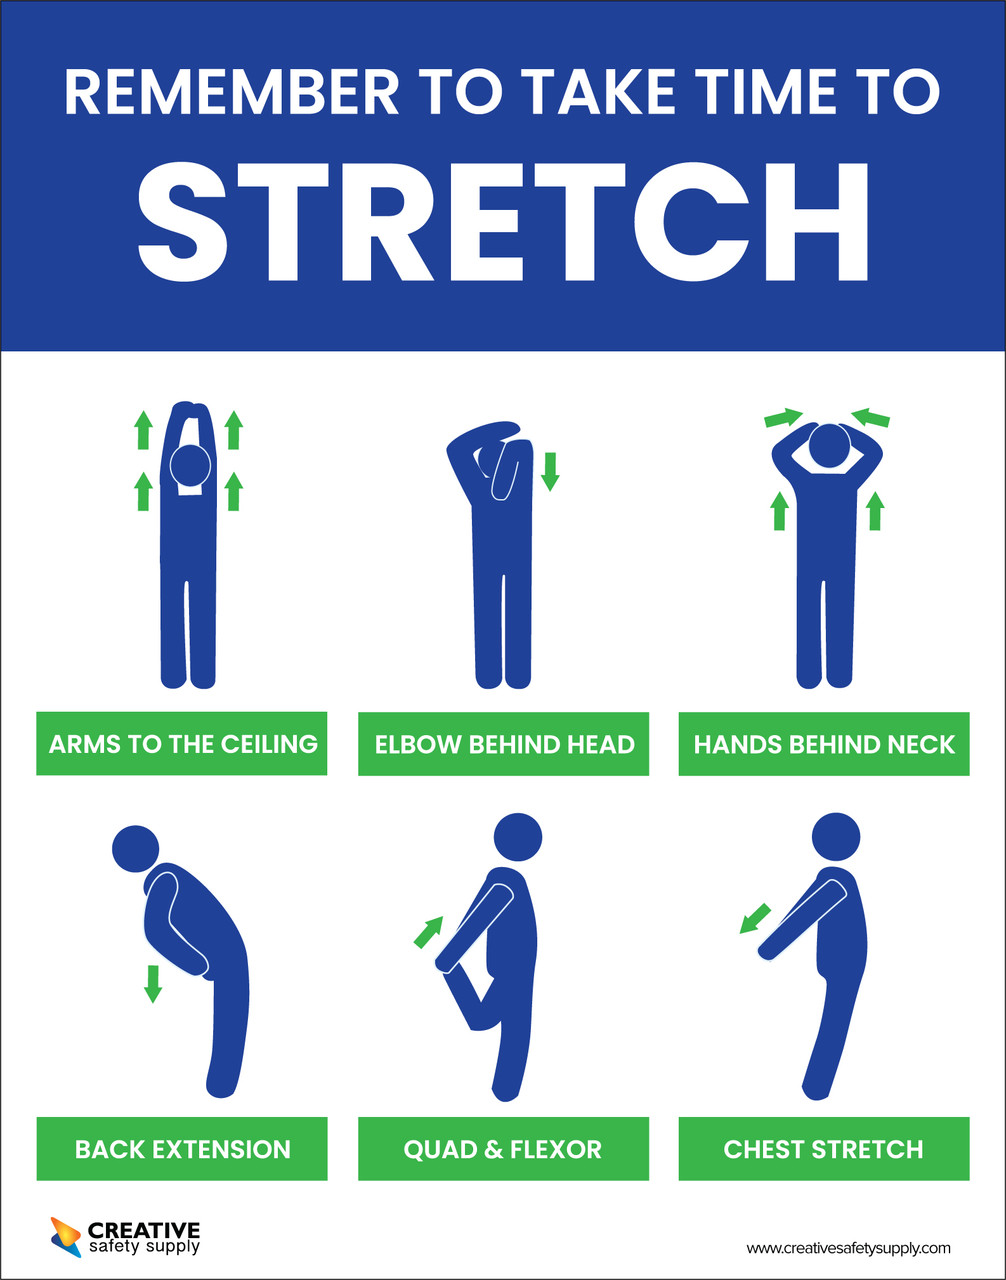 Remember to Take Time to Stretch - Poster